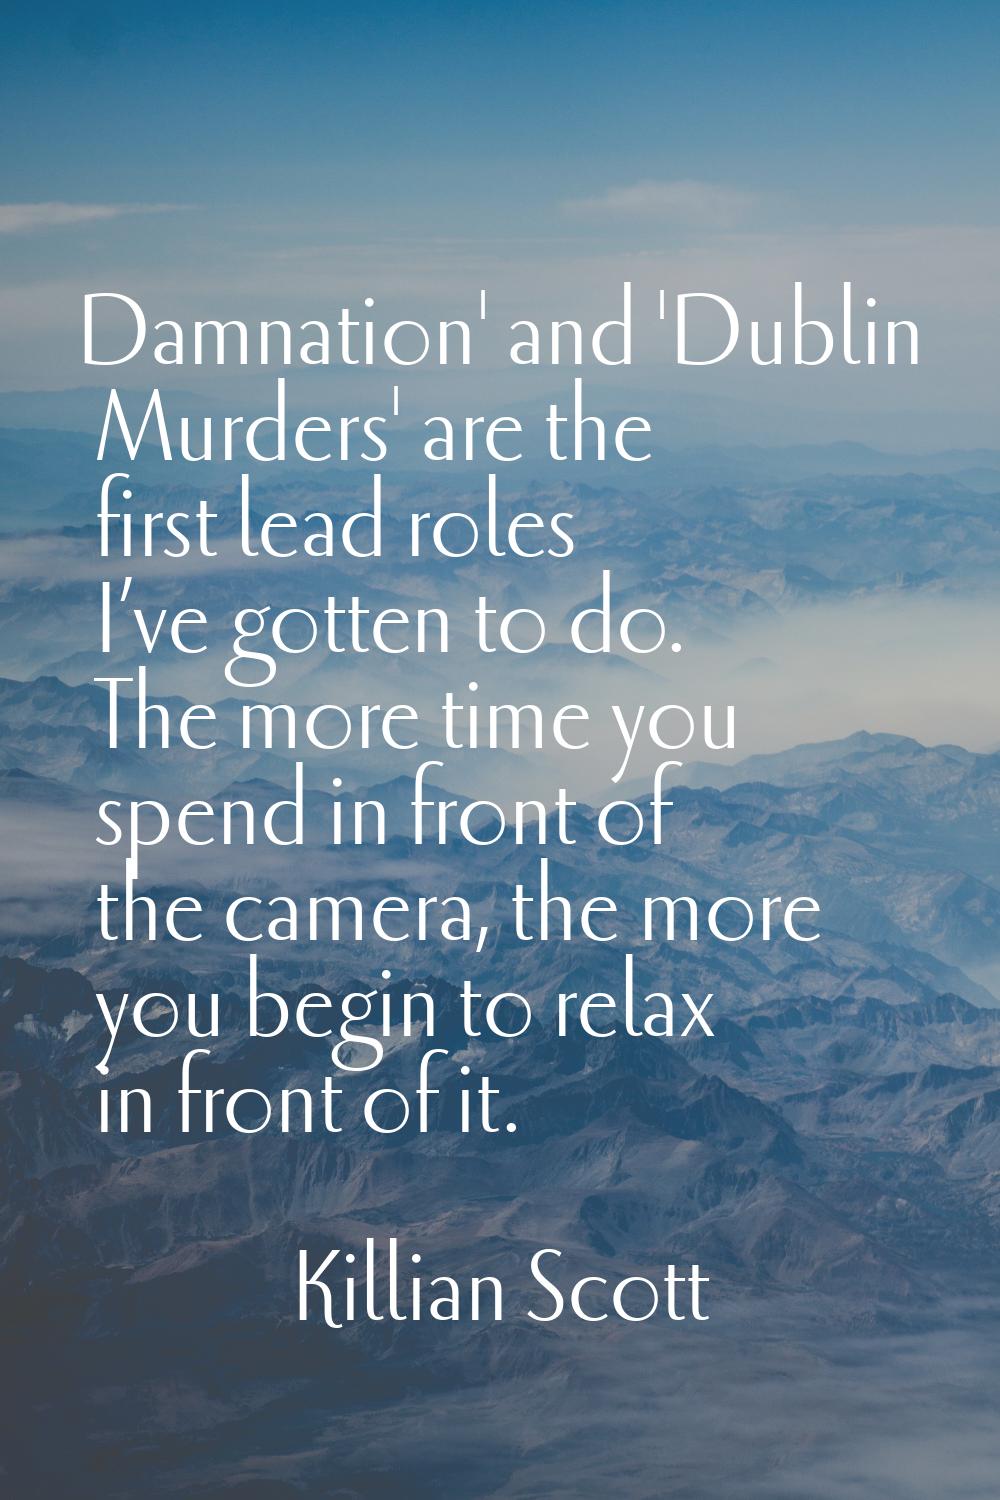 Damnation' and 'Dublin Murders' are the first lead roles I’ve gotten to do. The more time you spend